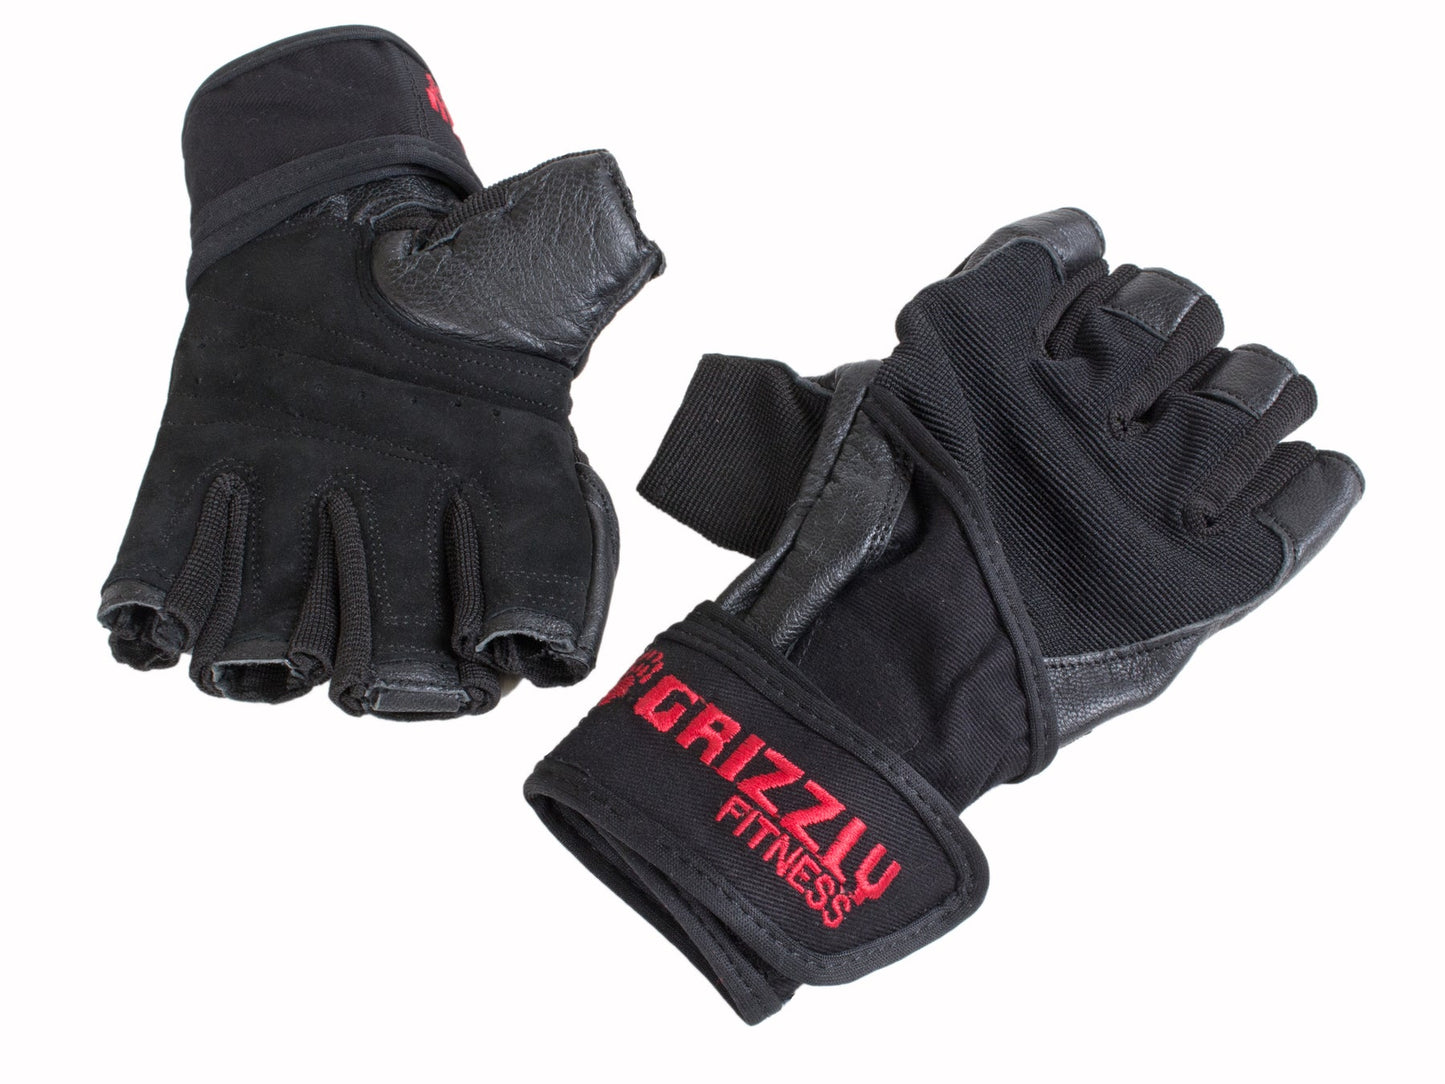 Grizzly Fitness Women's Ignite Lifting and Training Gloves